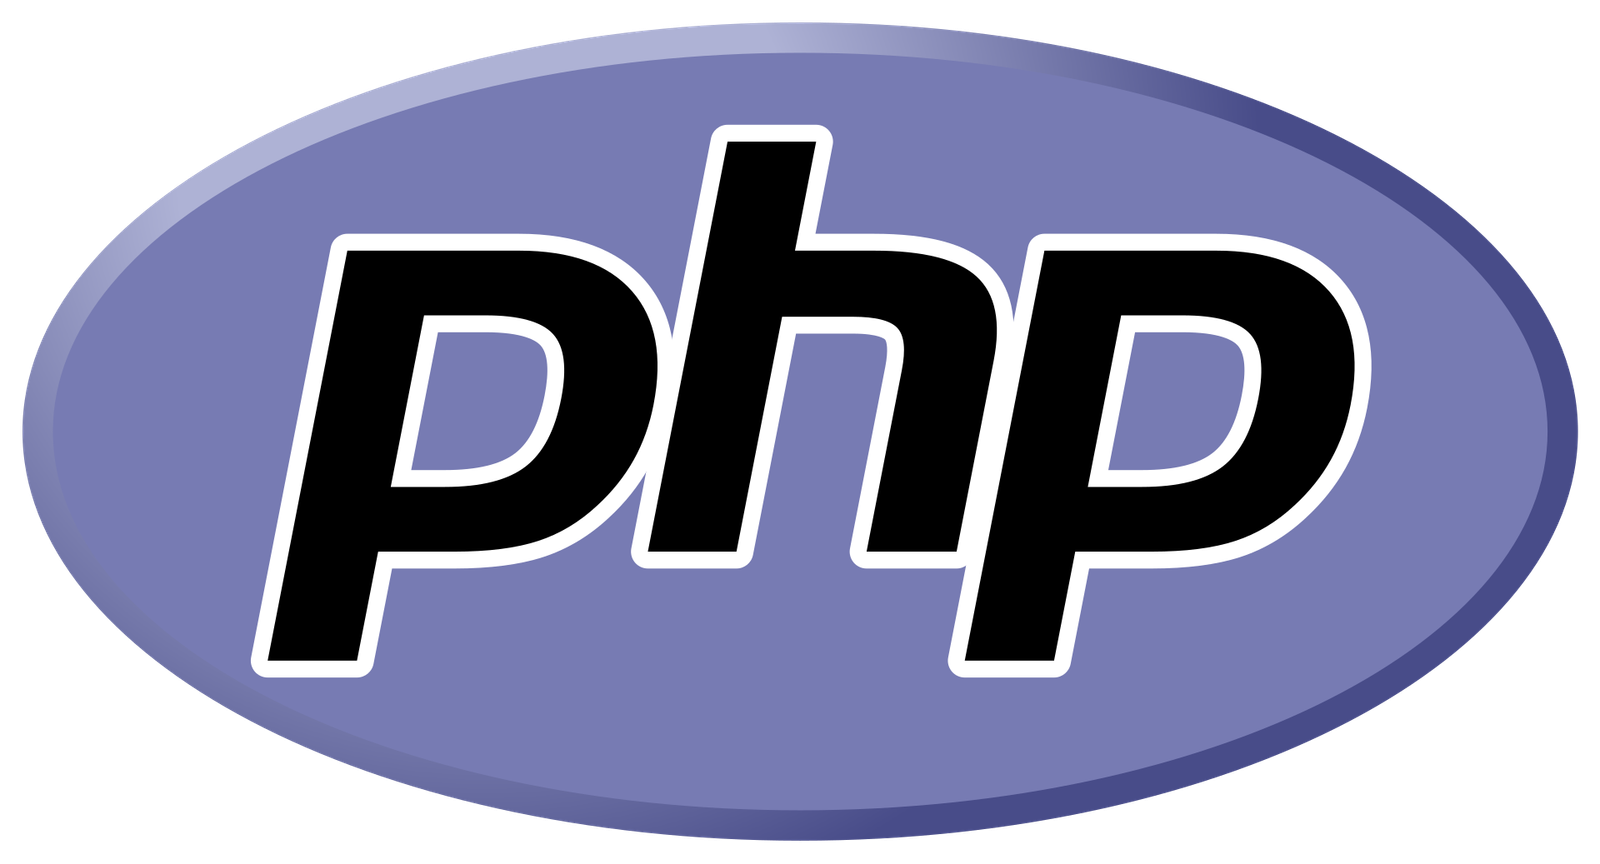 development of PHP web applications